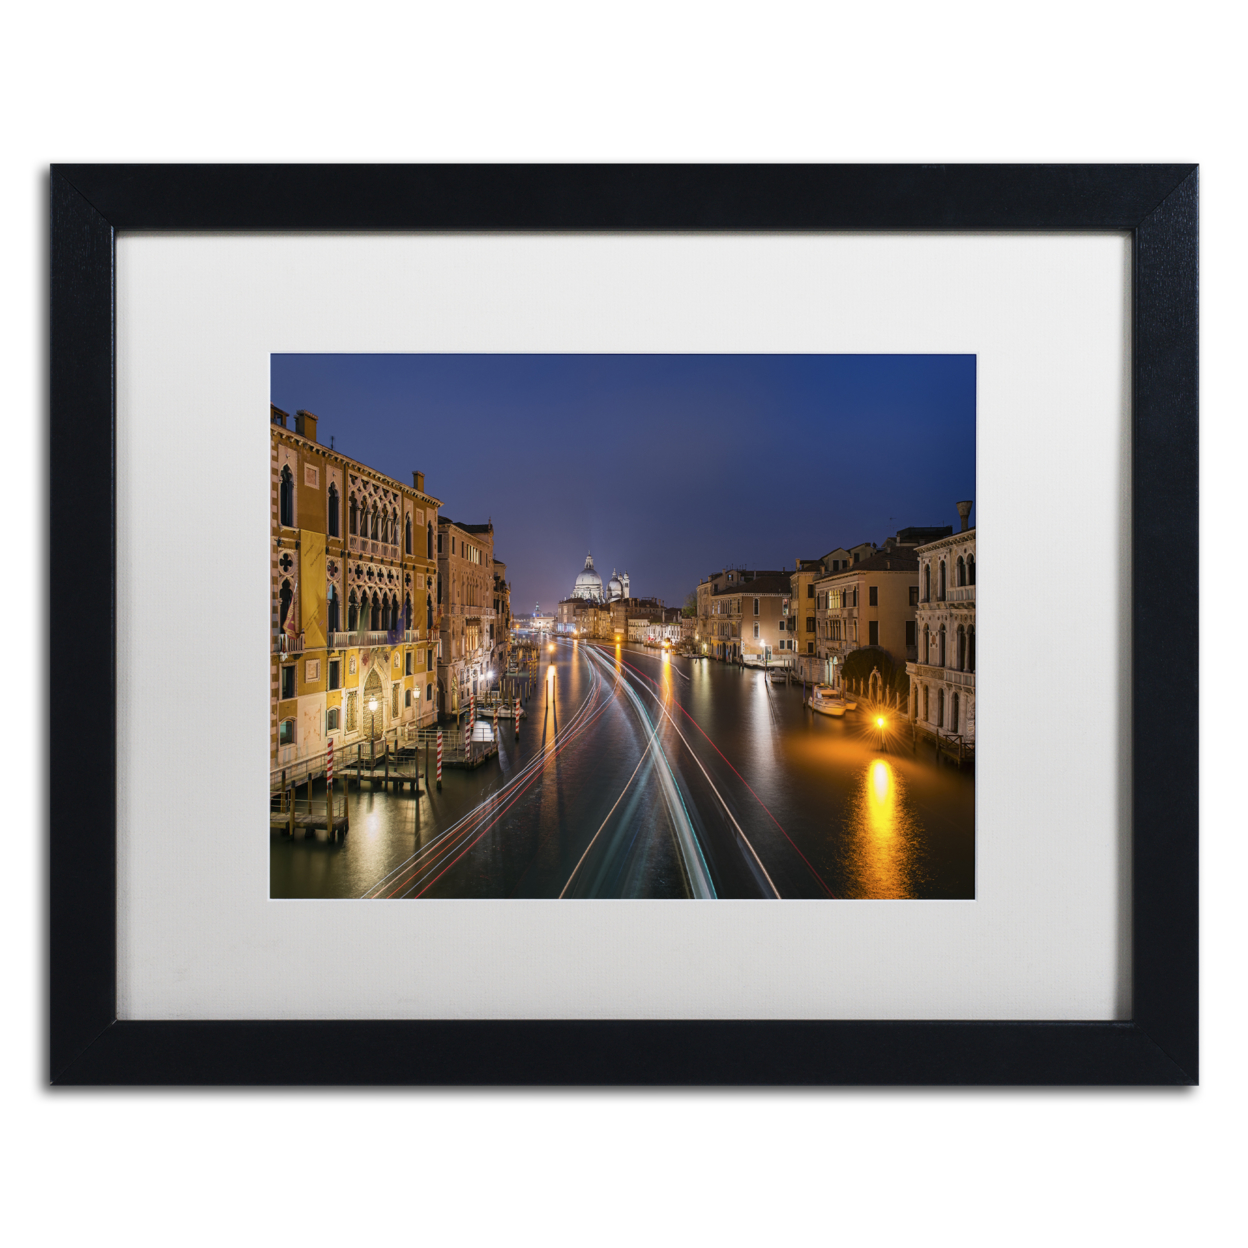 Michael Blanchette Photography 'On The Grand Canal' Black Wooden Framed Art 18 X 22 Inches